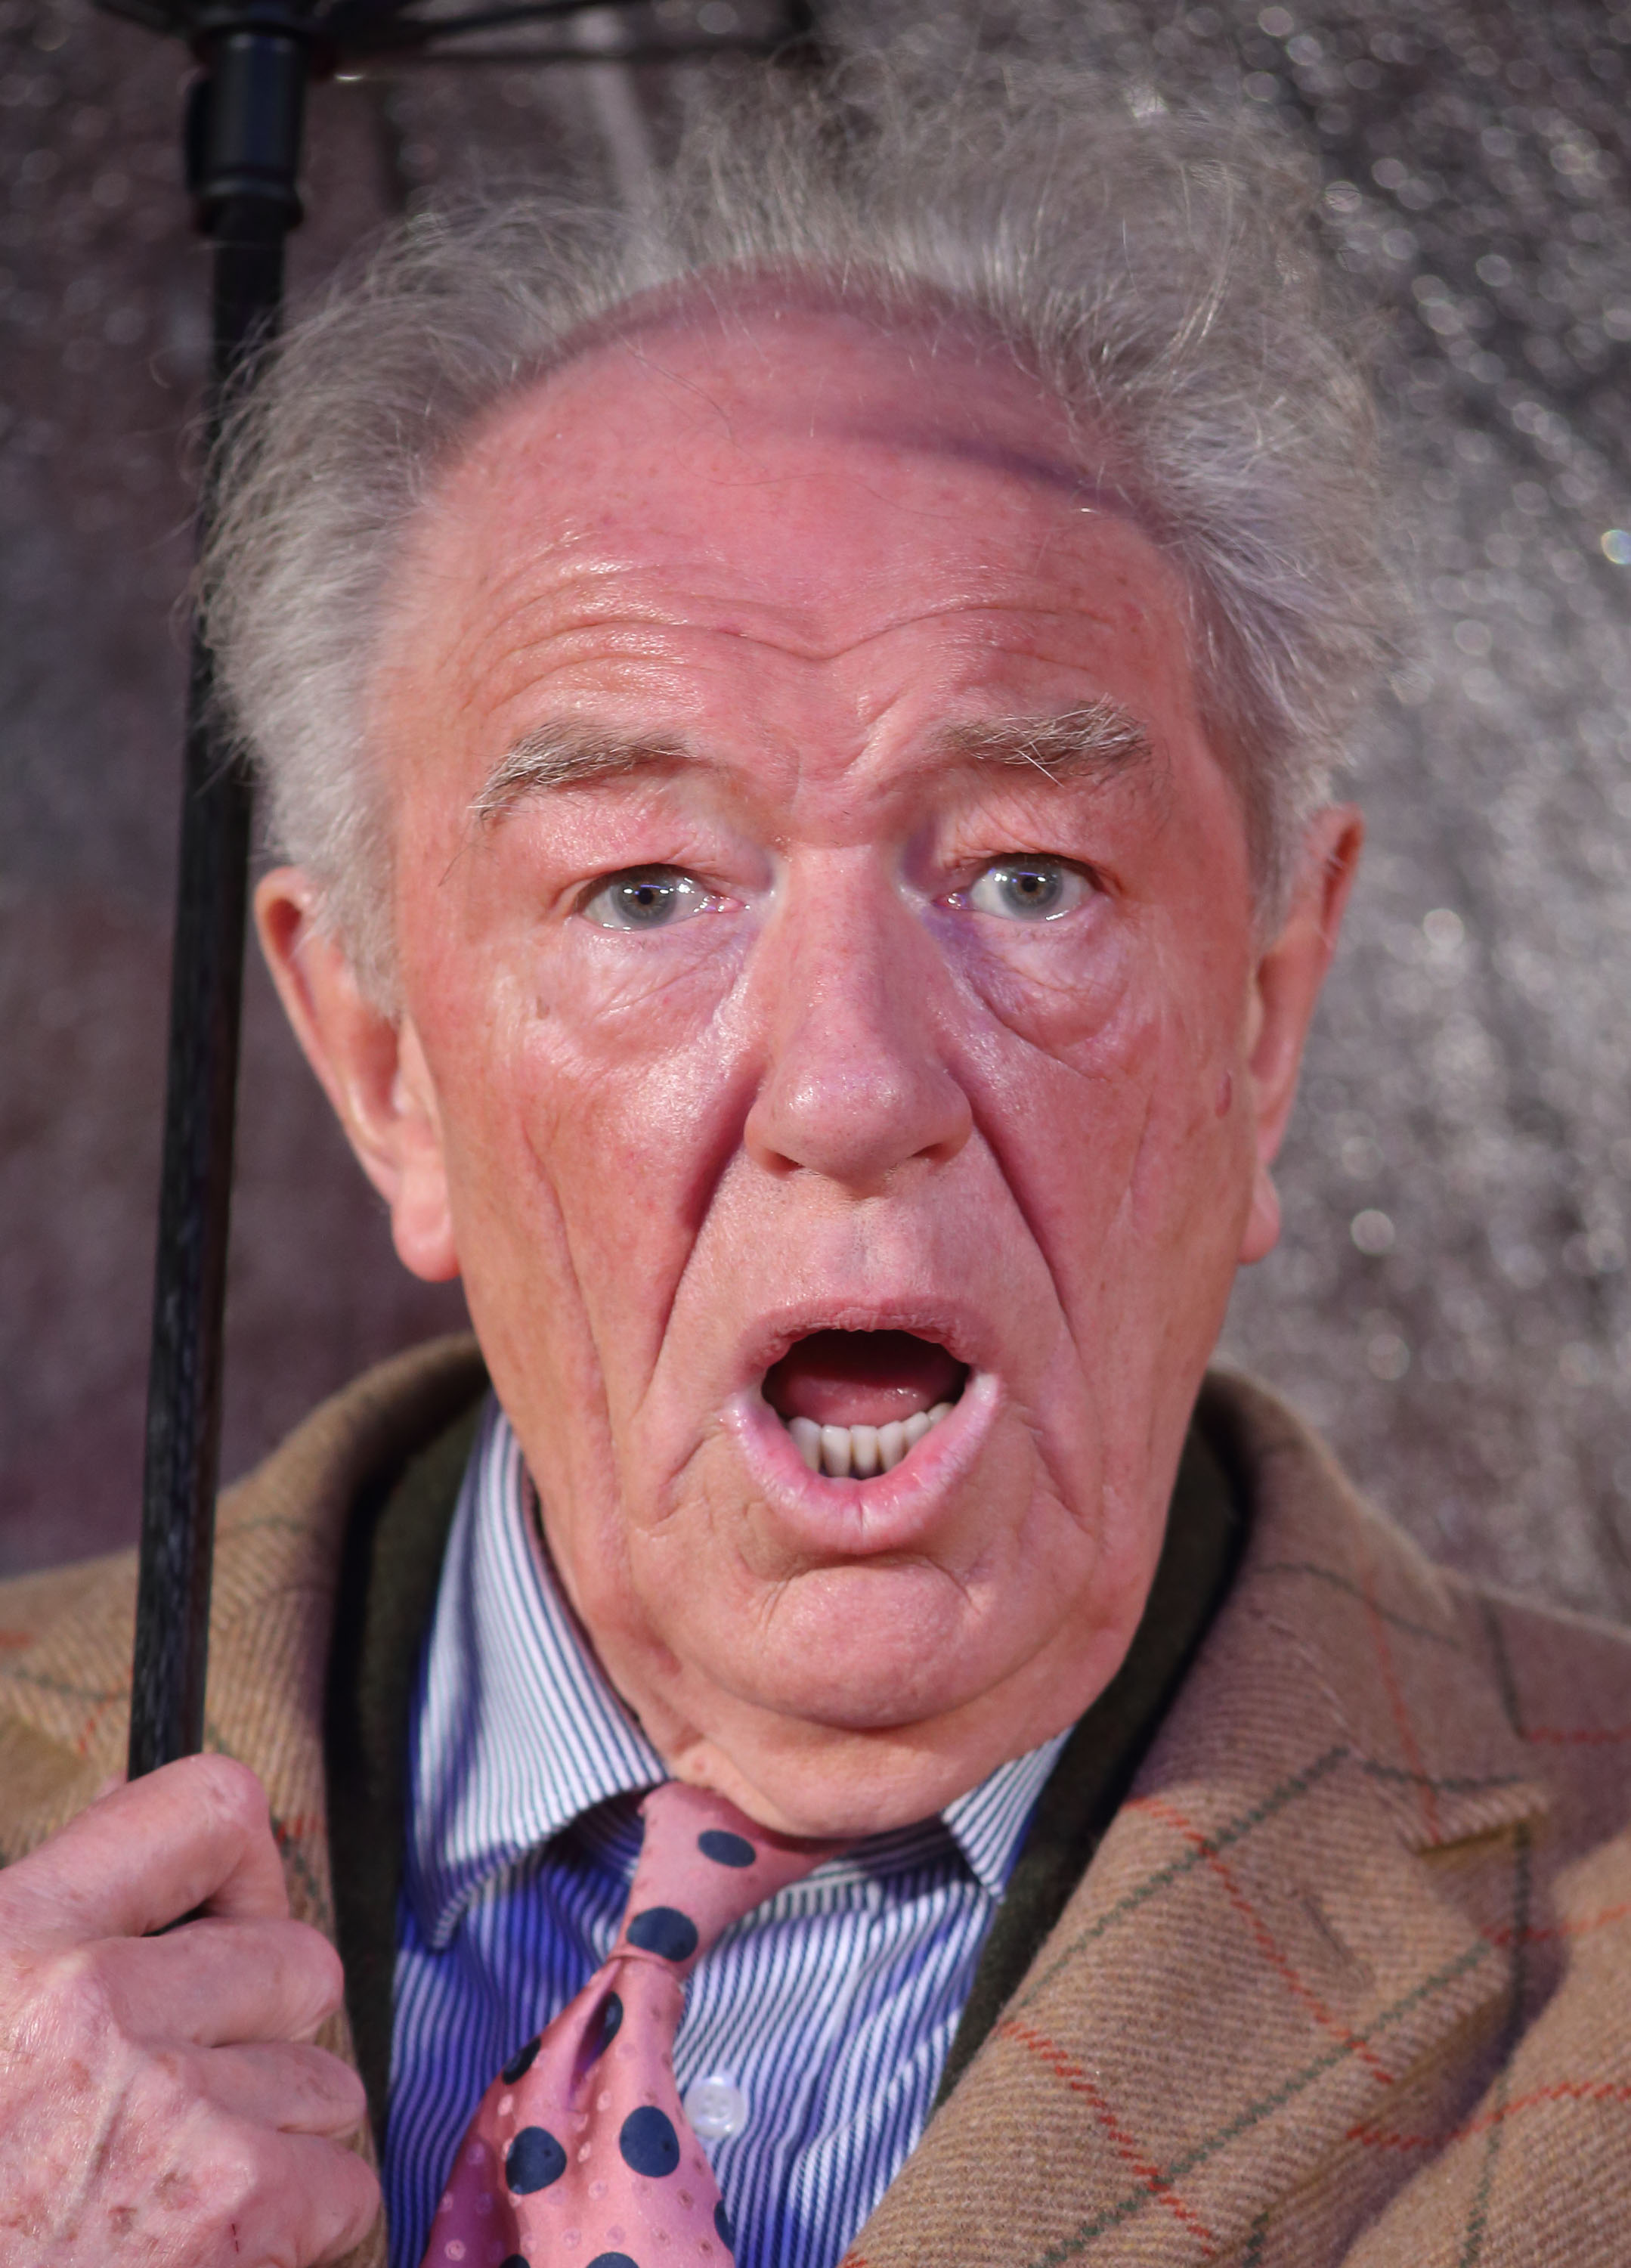 Michael Gambon at the "Dad's Army" World Premiere in London, United Kingdom, on January 26, 2016 | Source: Getty Images